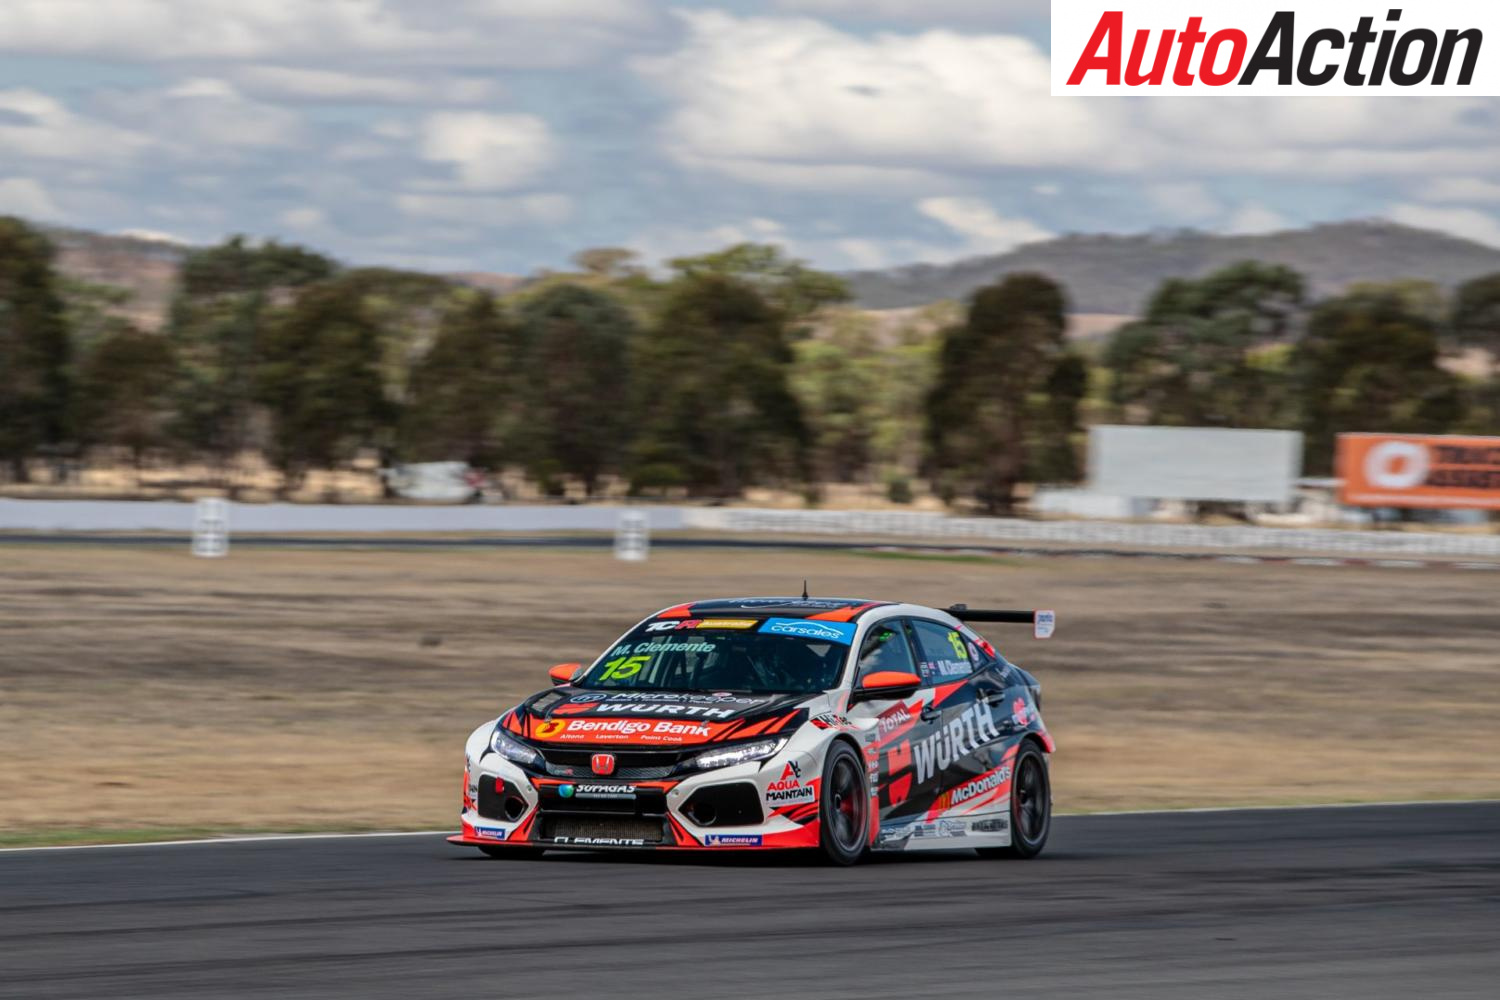 Michael Clemente was one of several rookies at the TCR test - Photo: InSyde Media